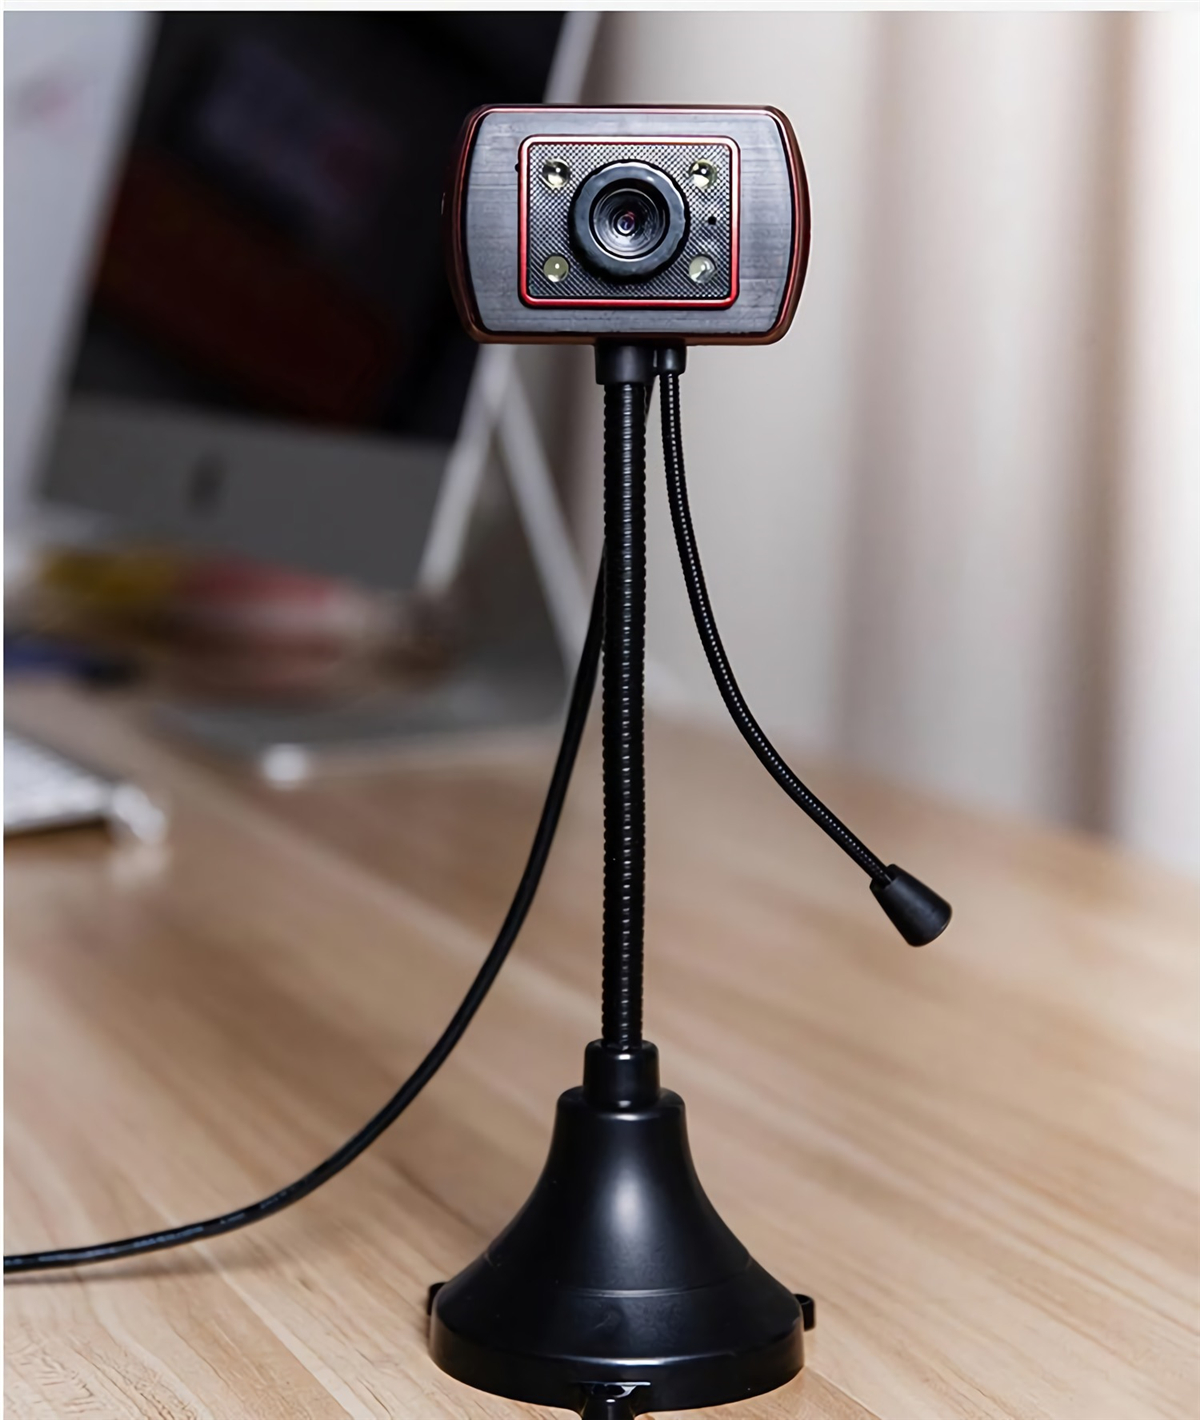 S620-480P-HD-Webcam-CMOS-USB-20-Wired-Computer-Web-Camera-Built-in-Microphone-Camera-for-Desktop-Com-1891978-12